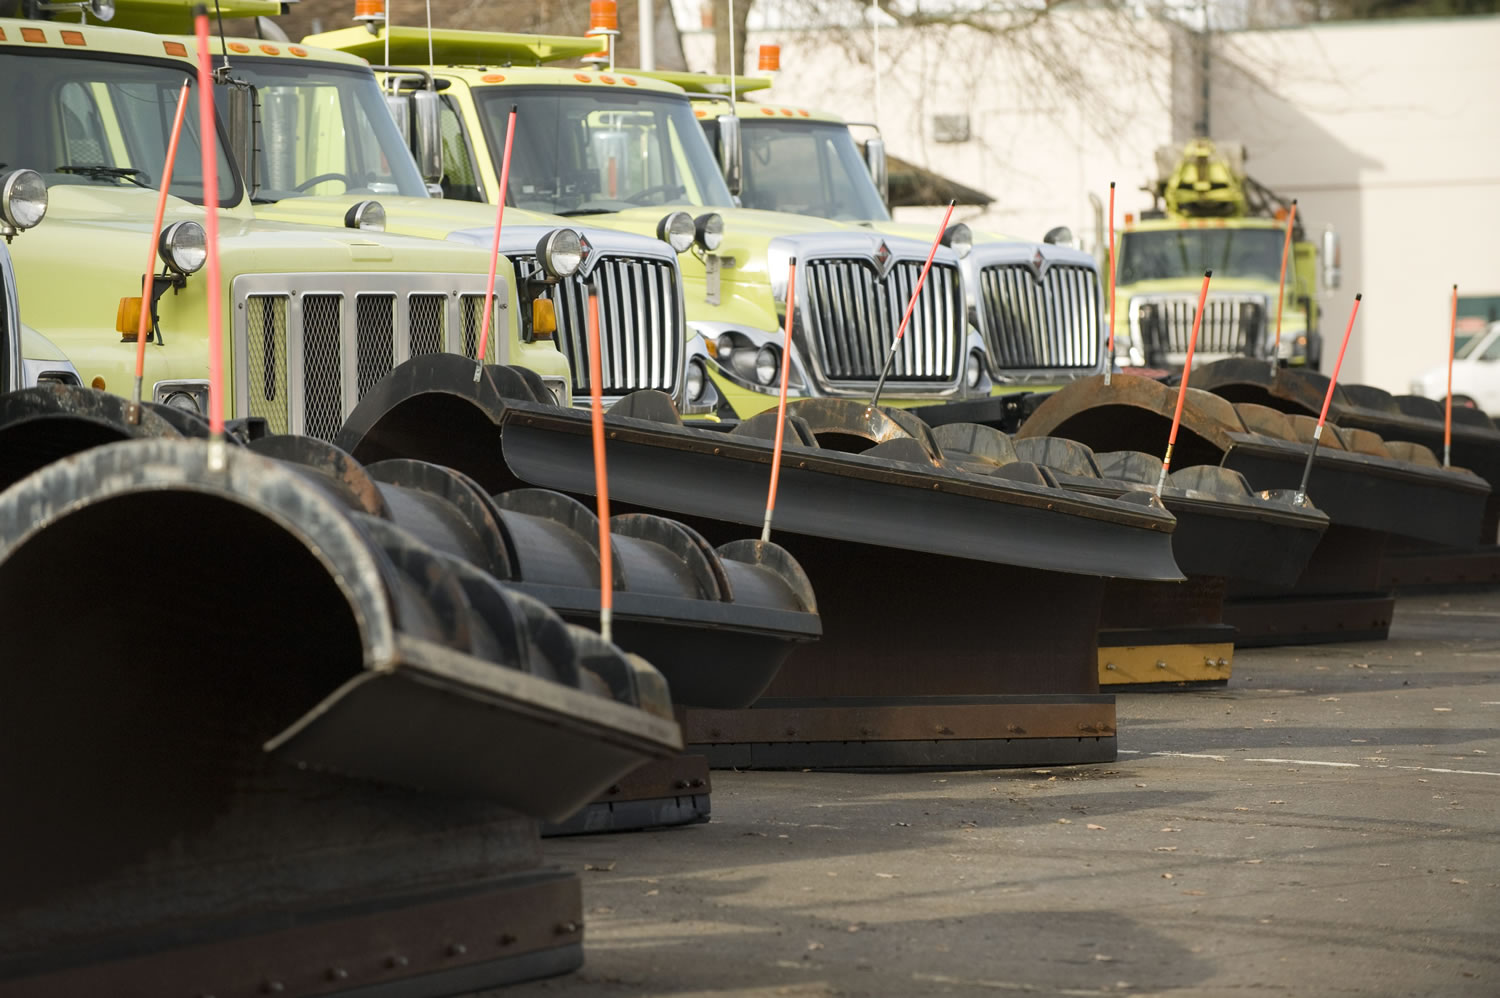 The Washington State Department of Transportation keeps a fleet of trucks and snow plows ready for action throughout the winter at its Vancouver maintenance facility. Forecasters expect low-elevation snow to fall across the region this weekend, with the first chance of flakes arriving Saturday night.